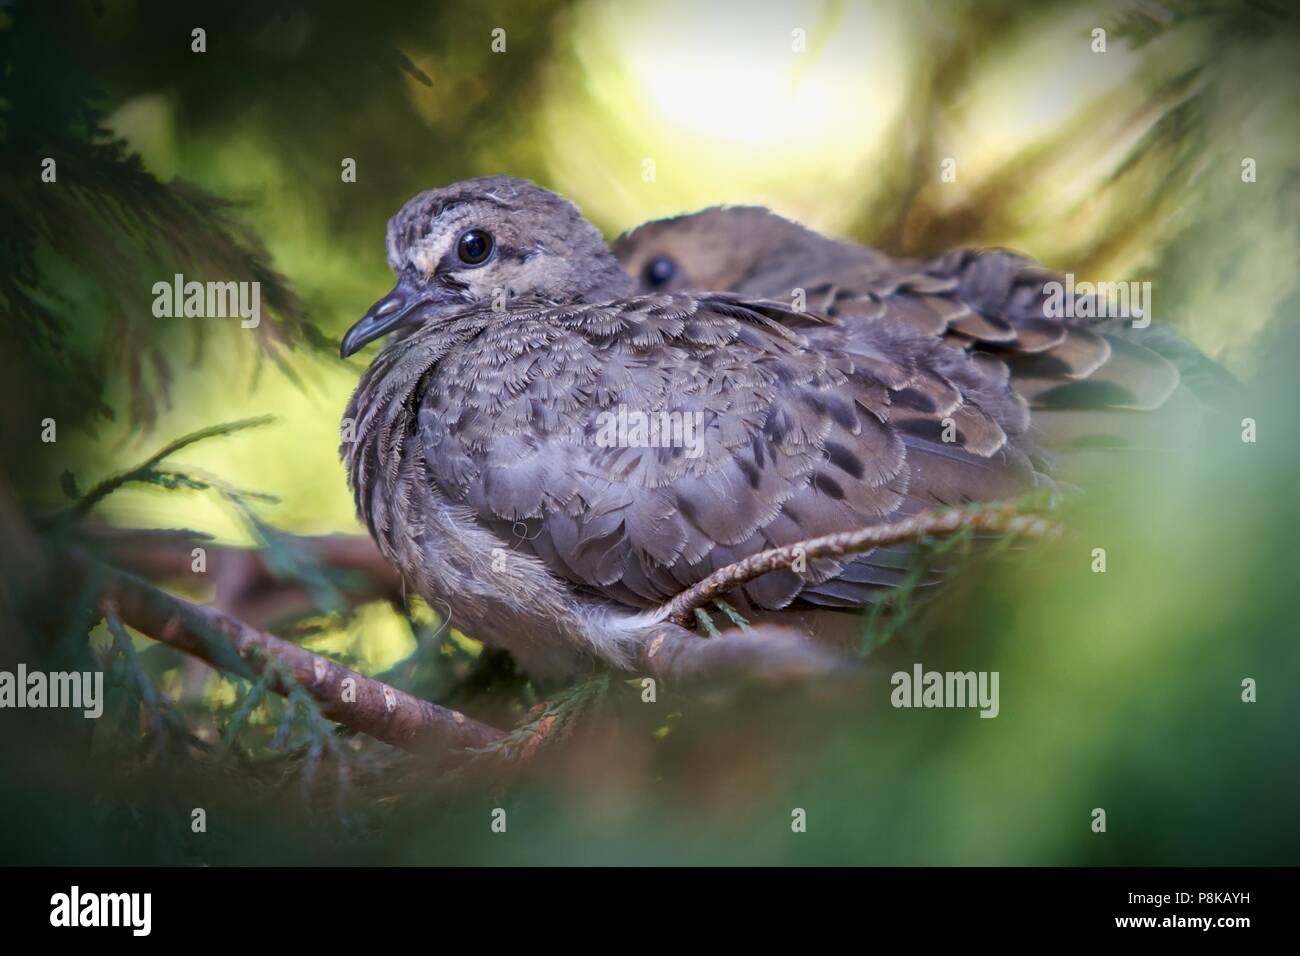 Two fledgling baby doves patiently wait for their first flying lesson from their cypress tree perch in a forest setting. Stock Photo